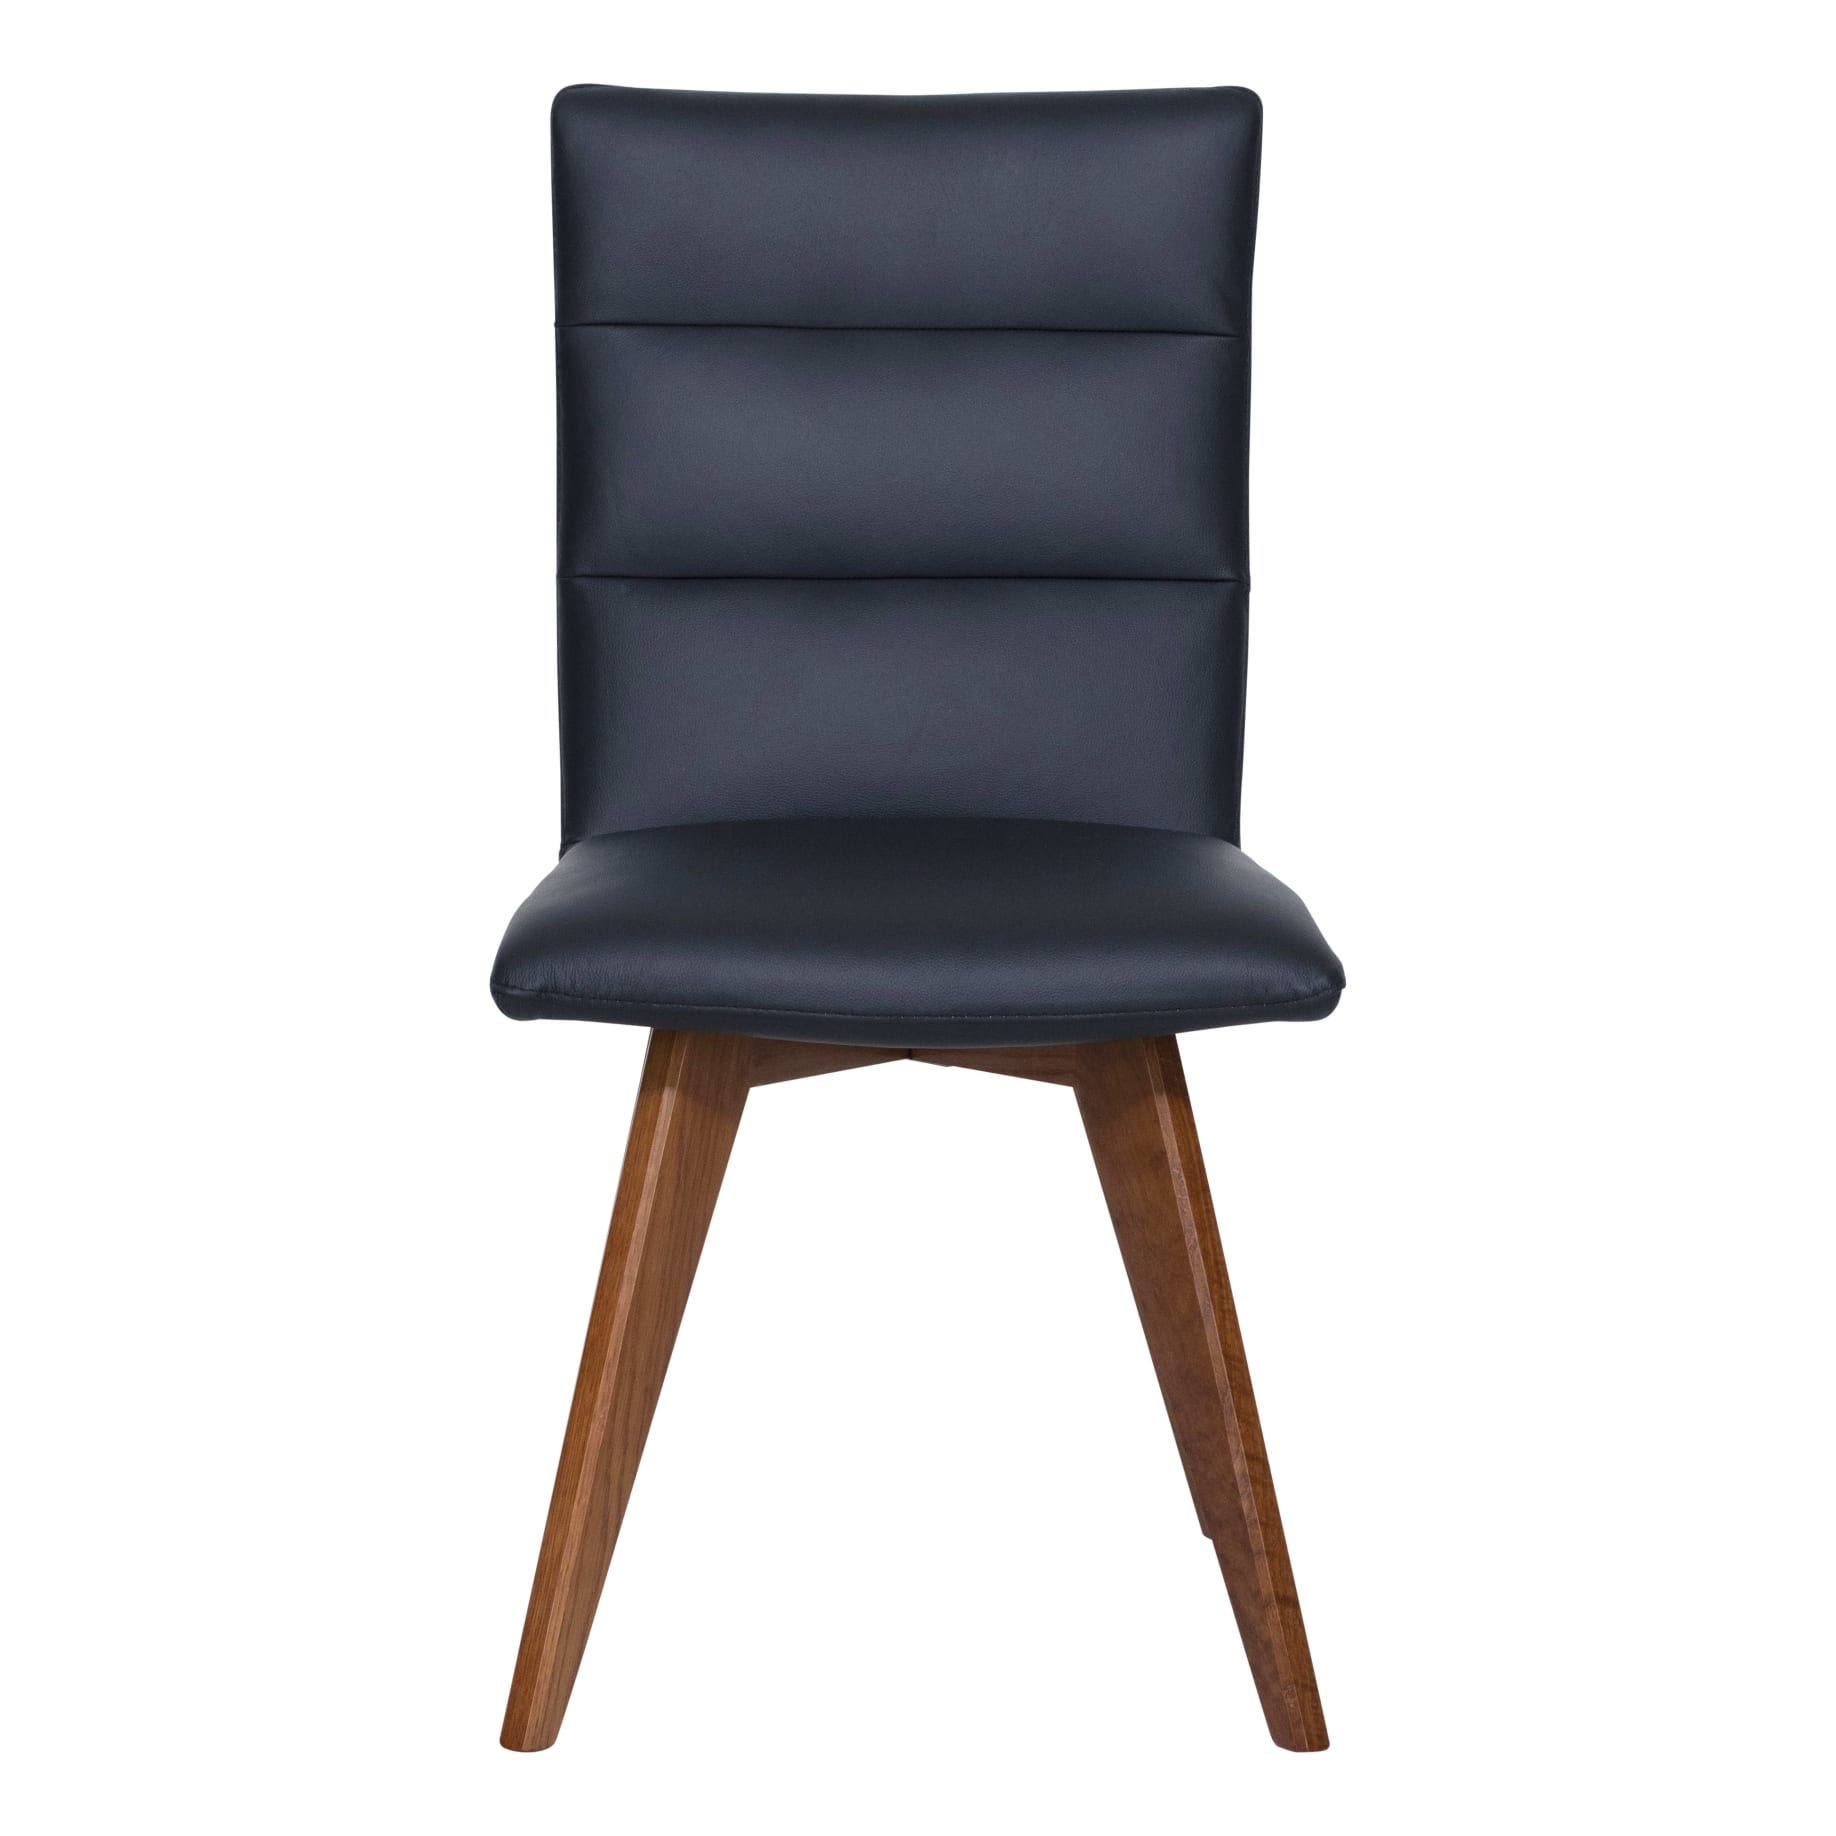 Hudson Dining Chair in Leather Black / Blackwood Stain